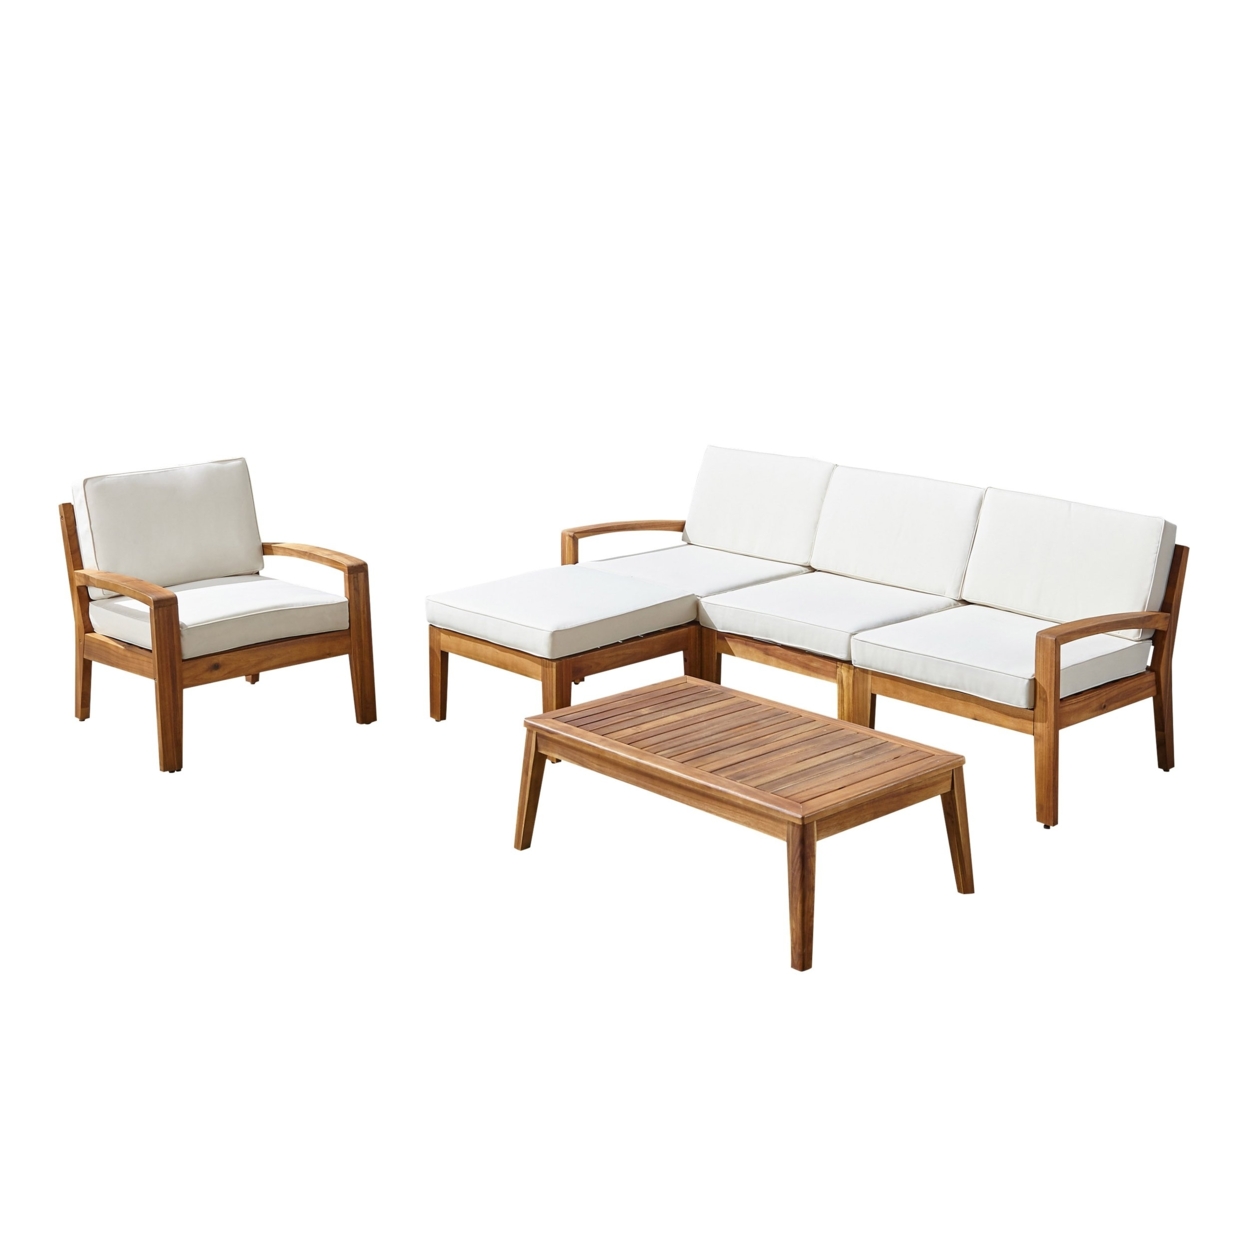 Parma 4-Seater Sectional Sofa Set For Patio With Club Chair - Teak / Blue